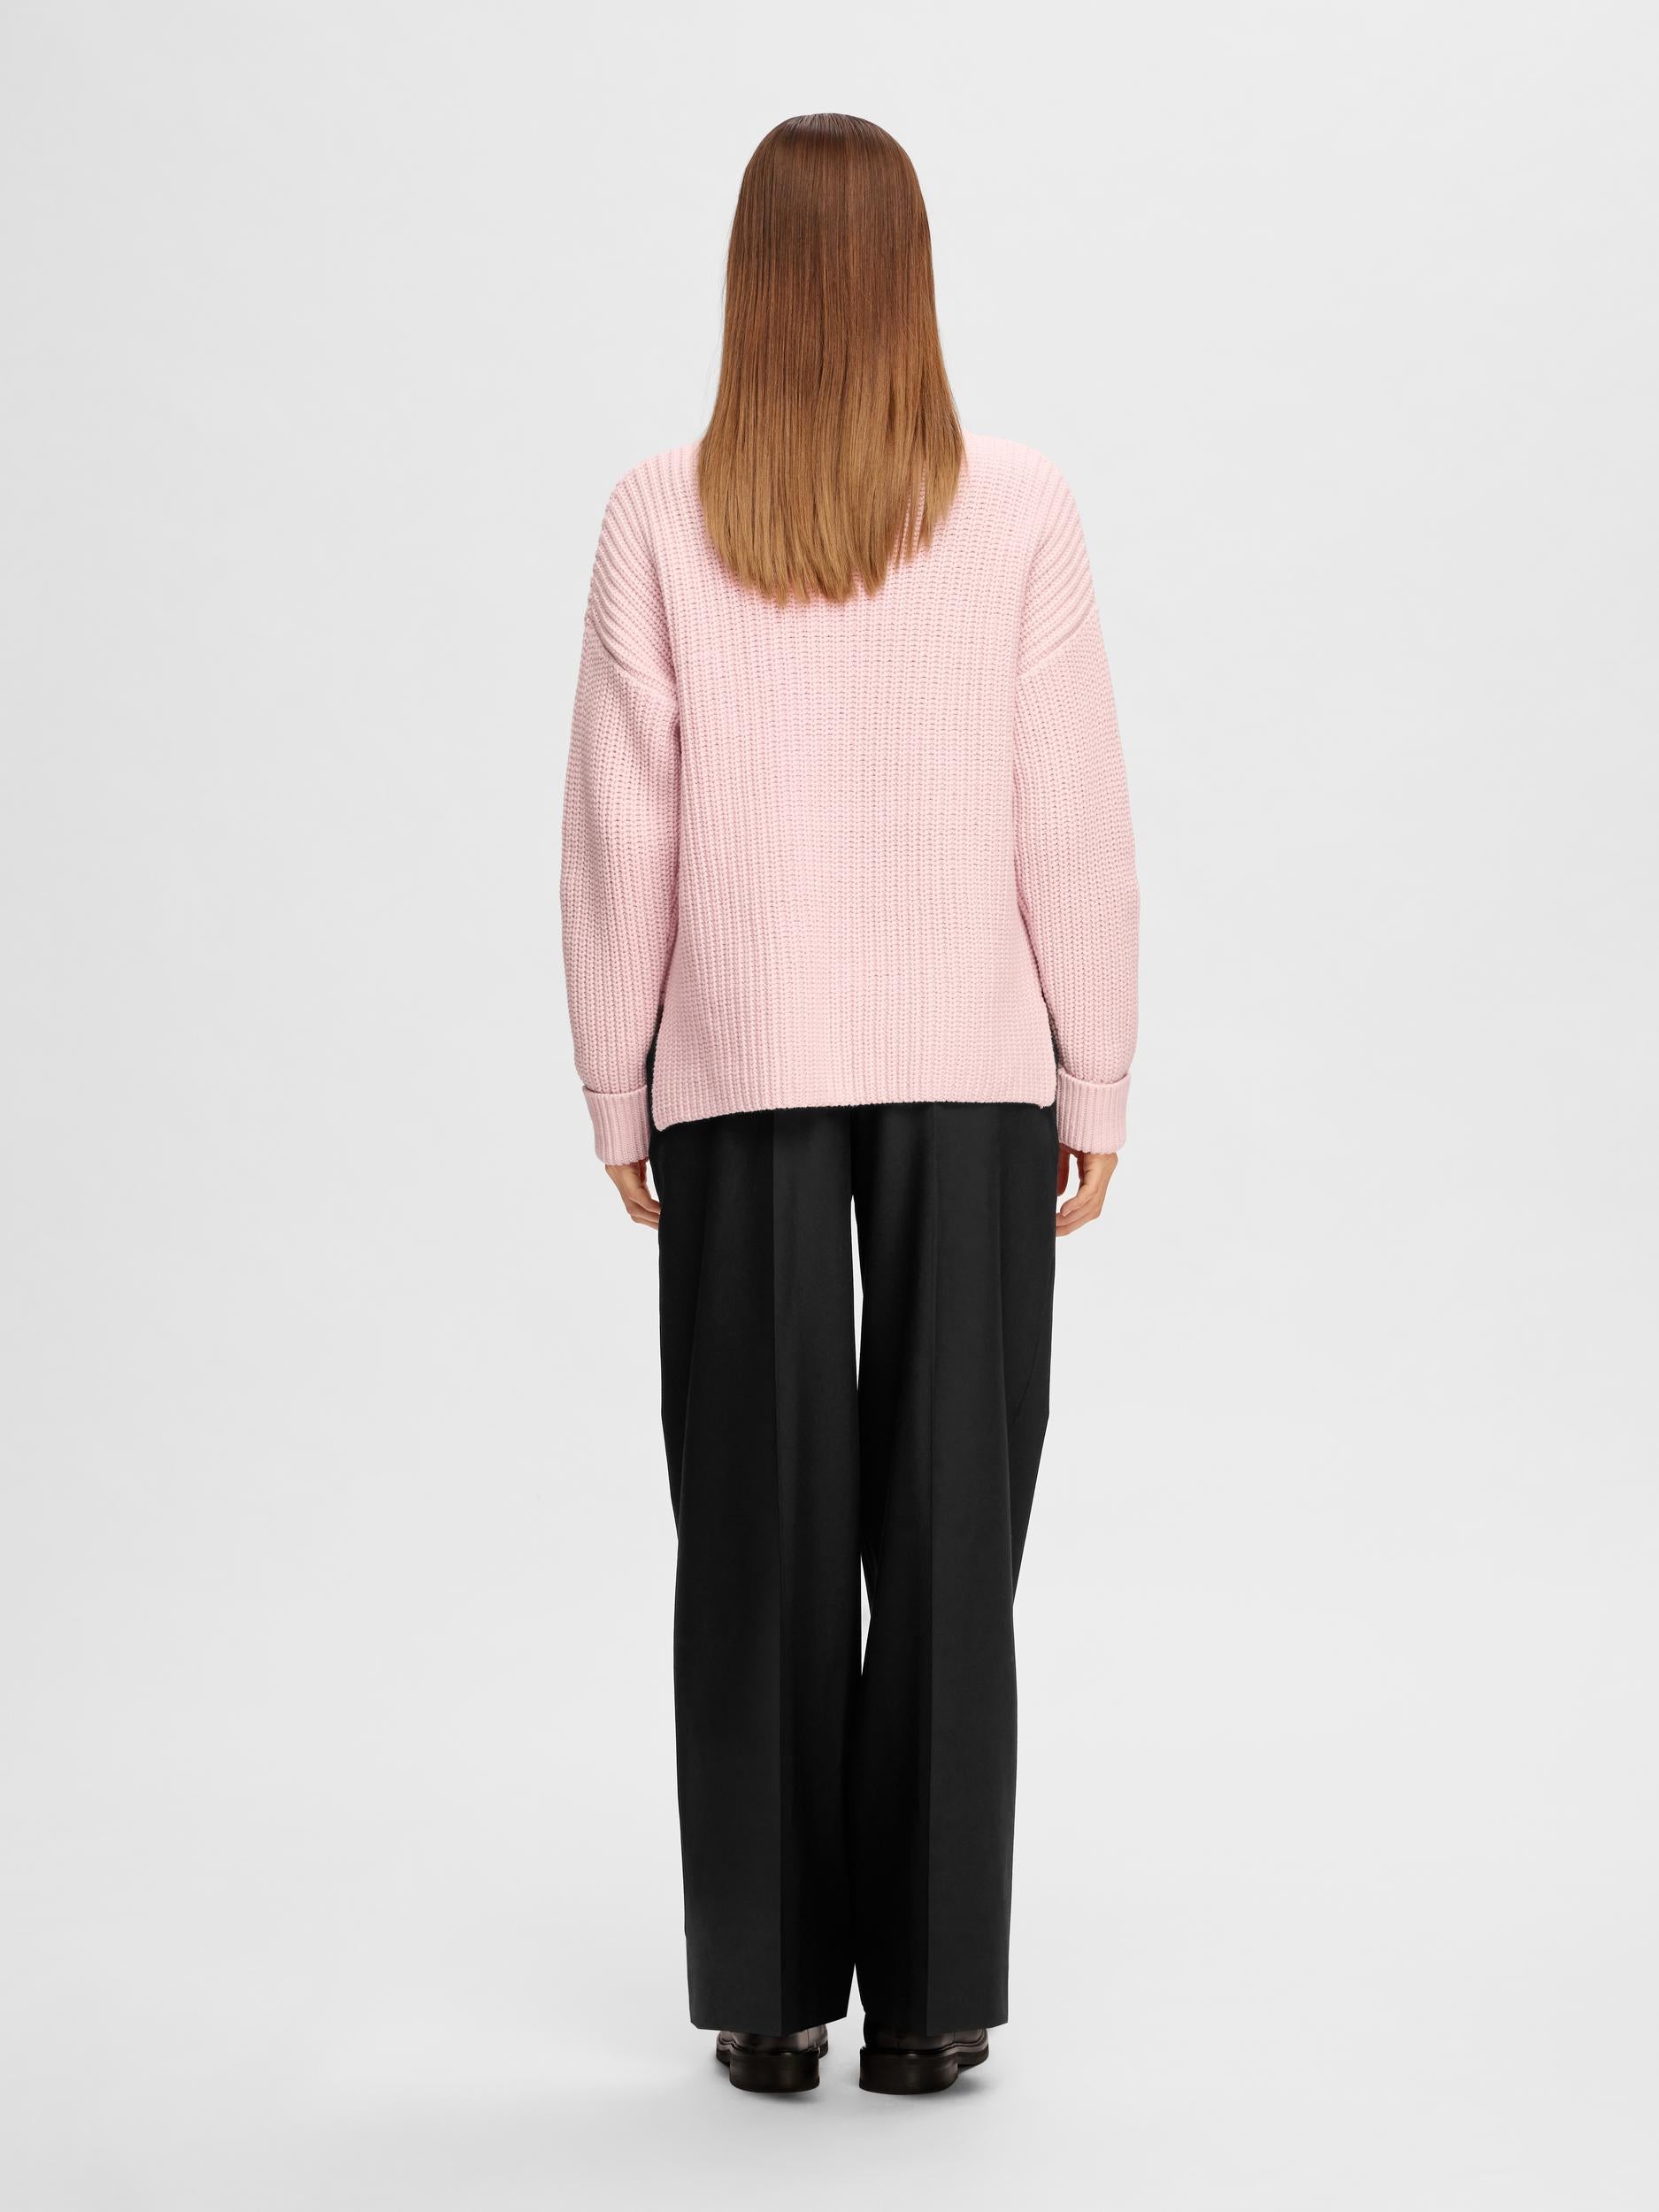 Selected Femme "Selma" Knit Pullover rosa